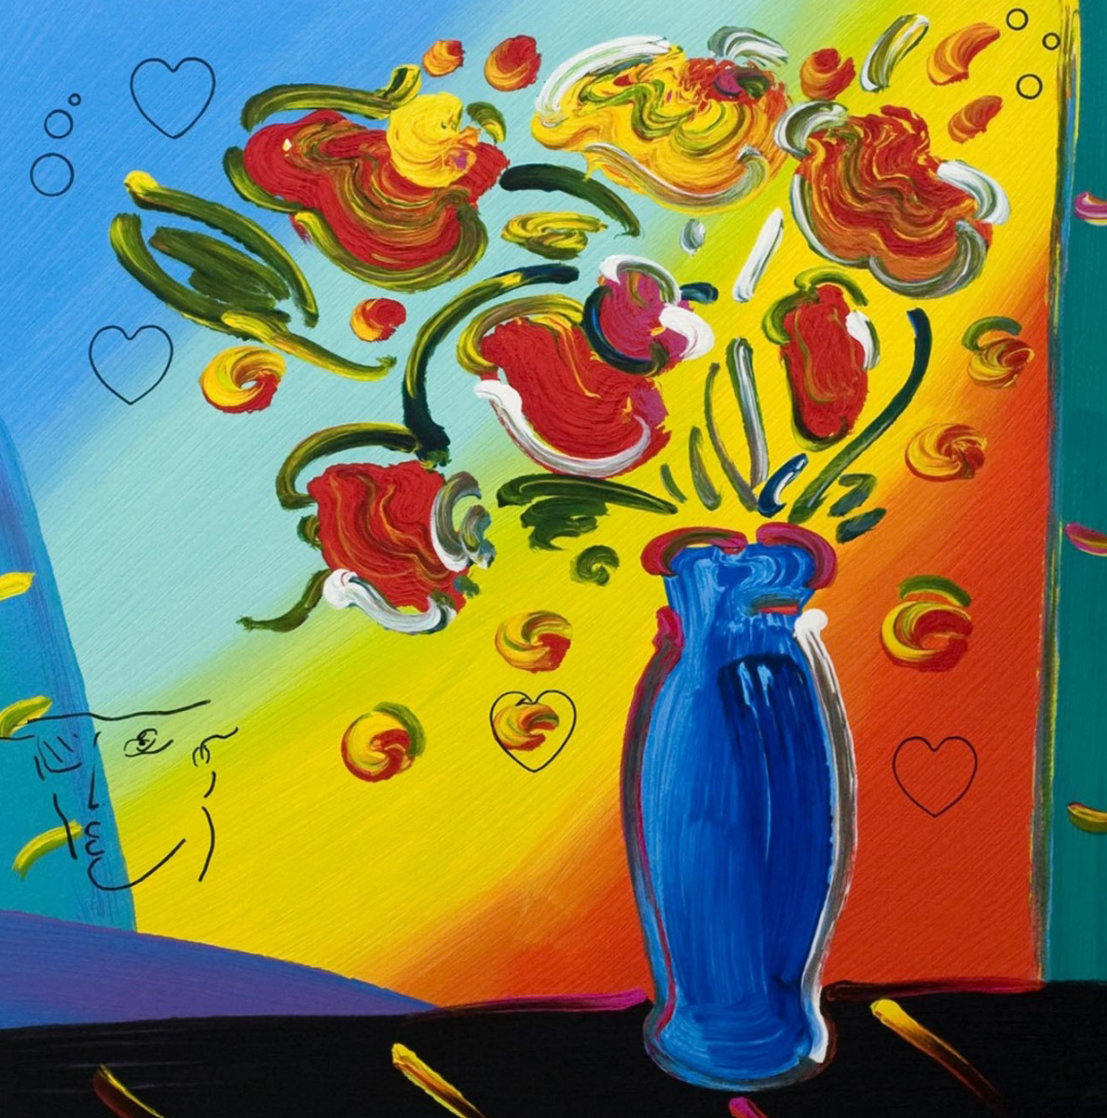 Vase of Flowers 2011 by Peter Max